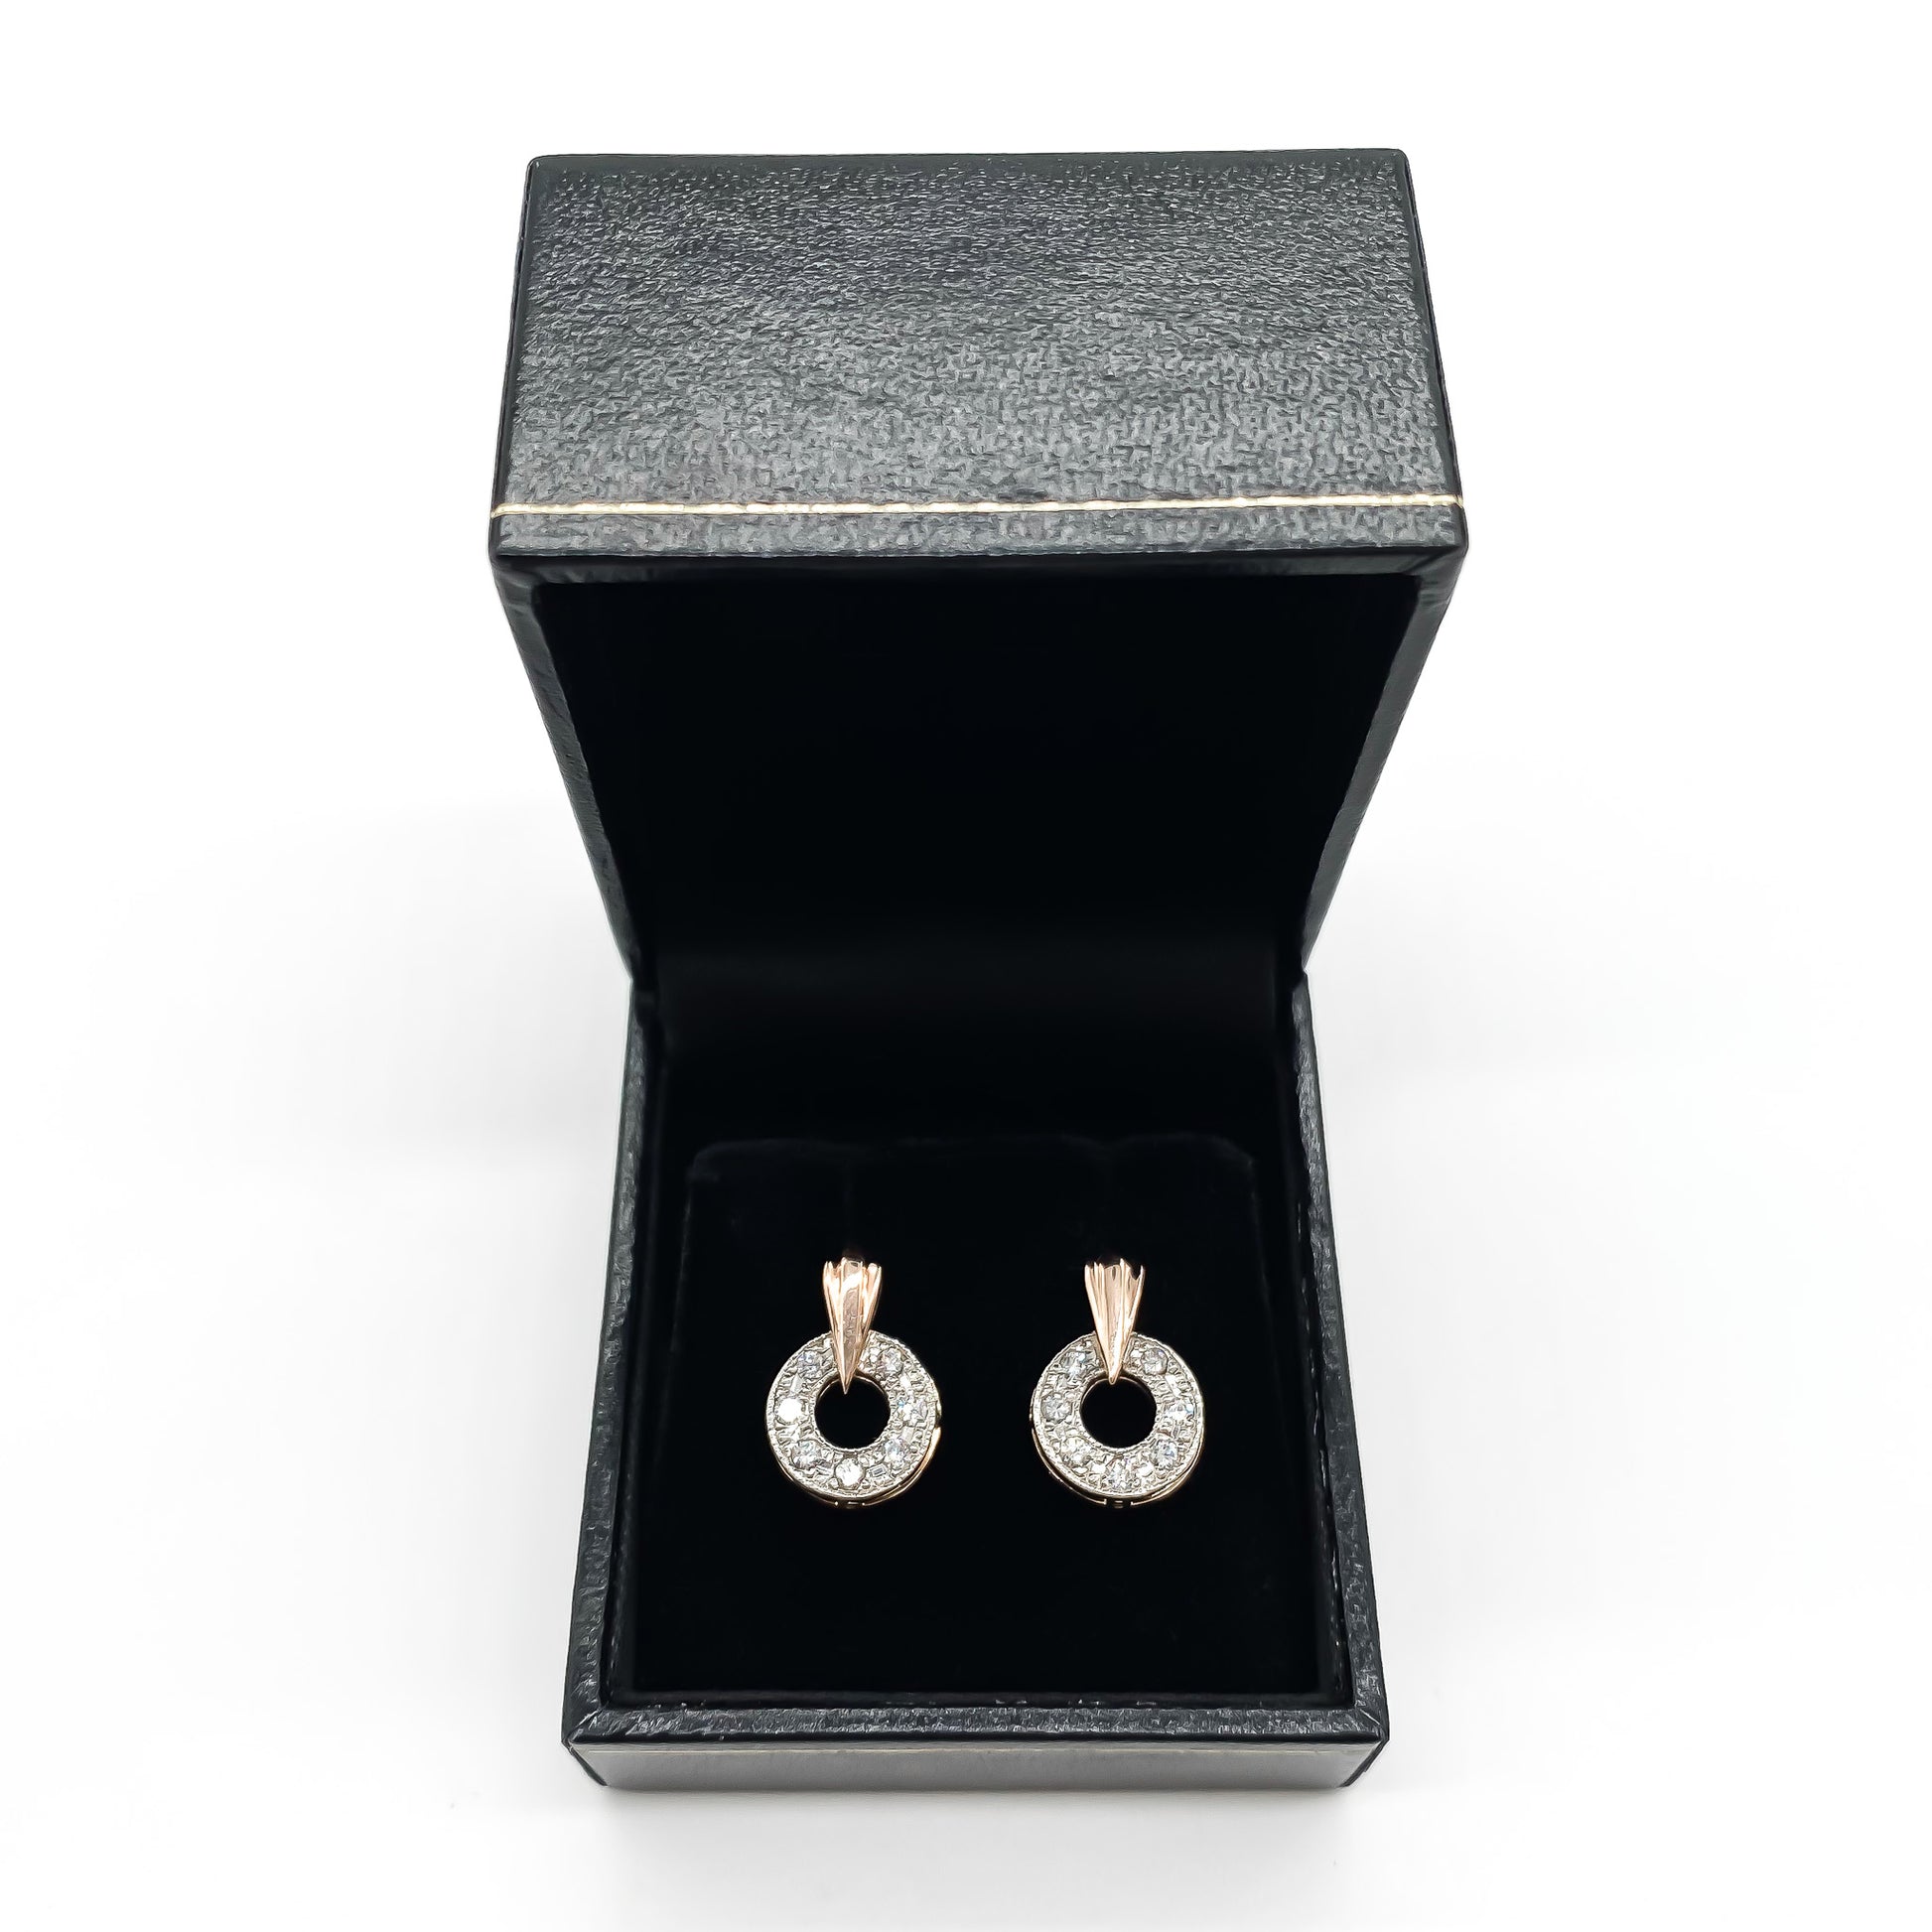 Stylish Art Deco 15ct rose and white gold drop earrings with sparkling pavé set diamonds. 